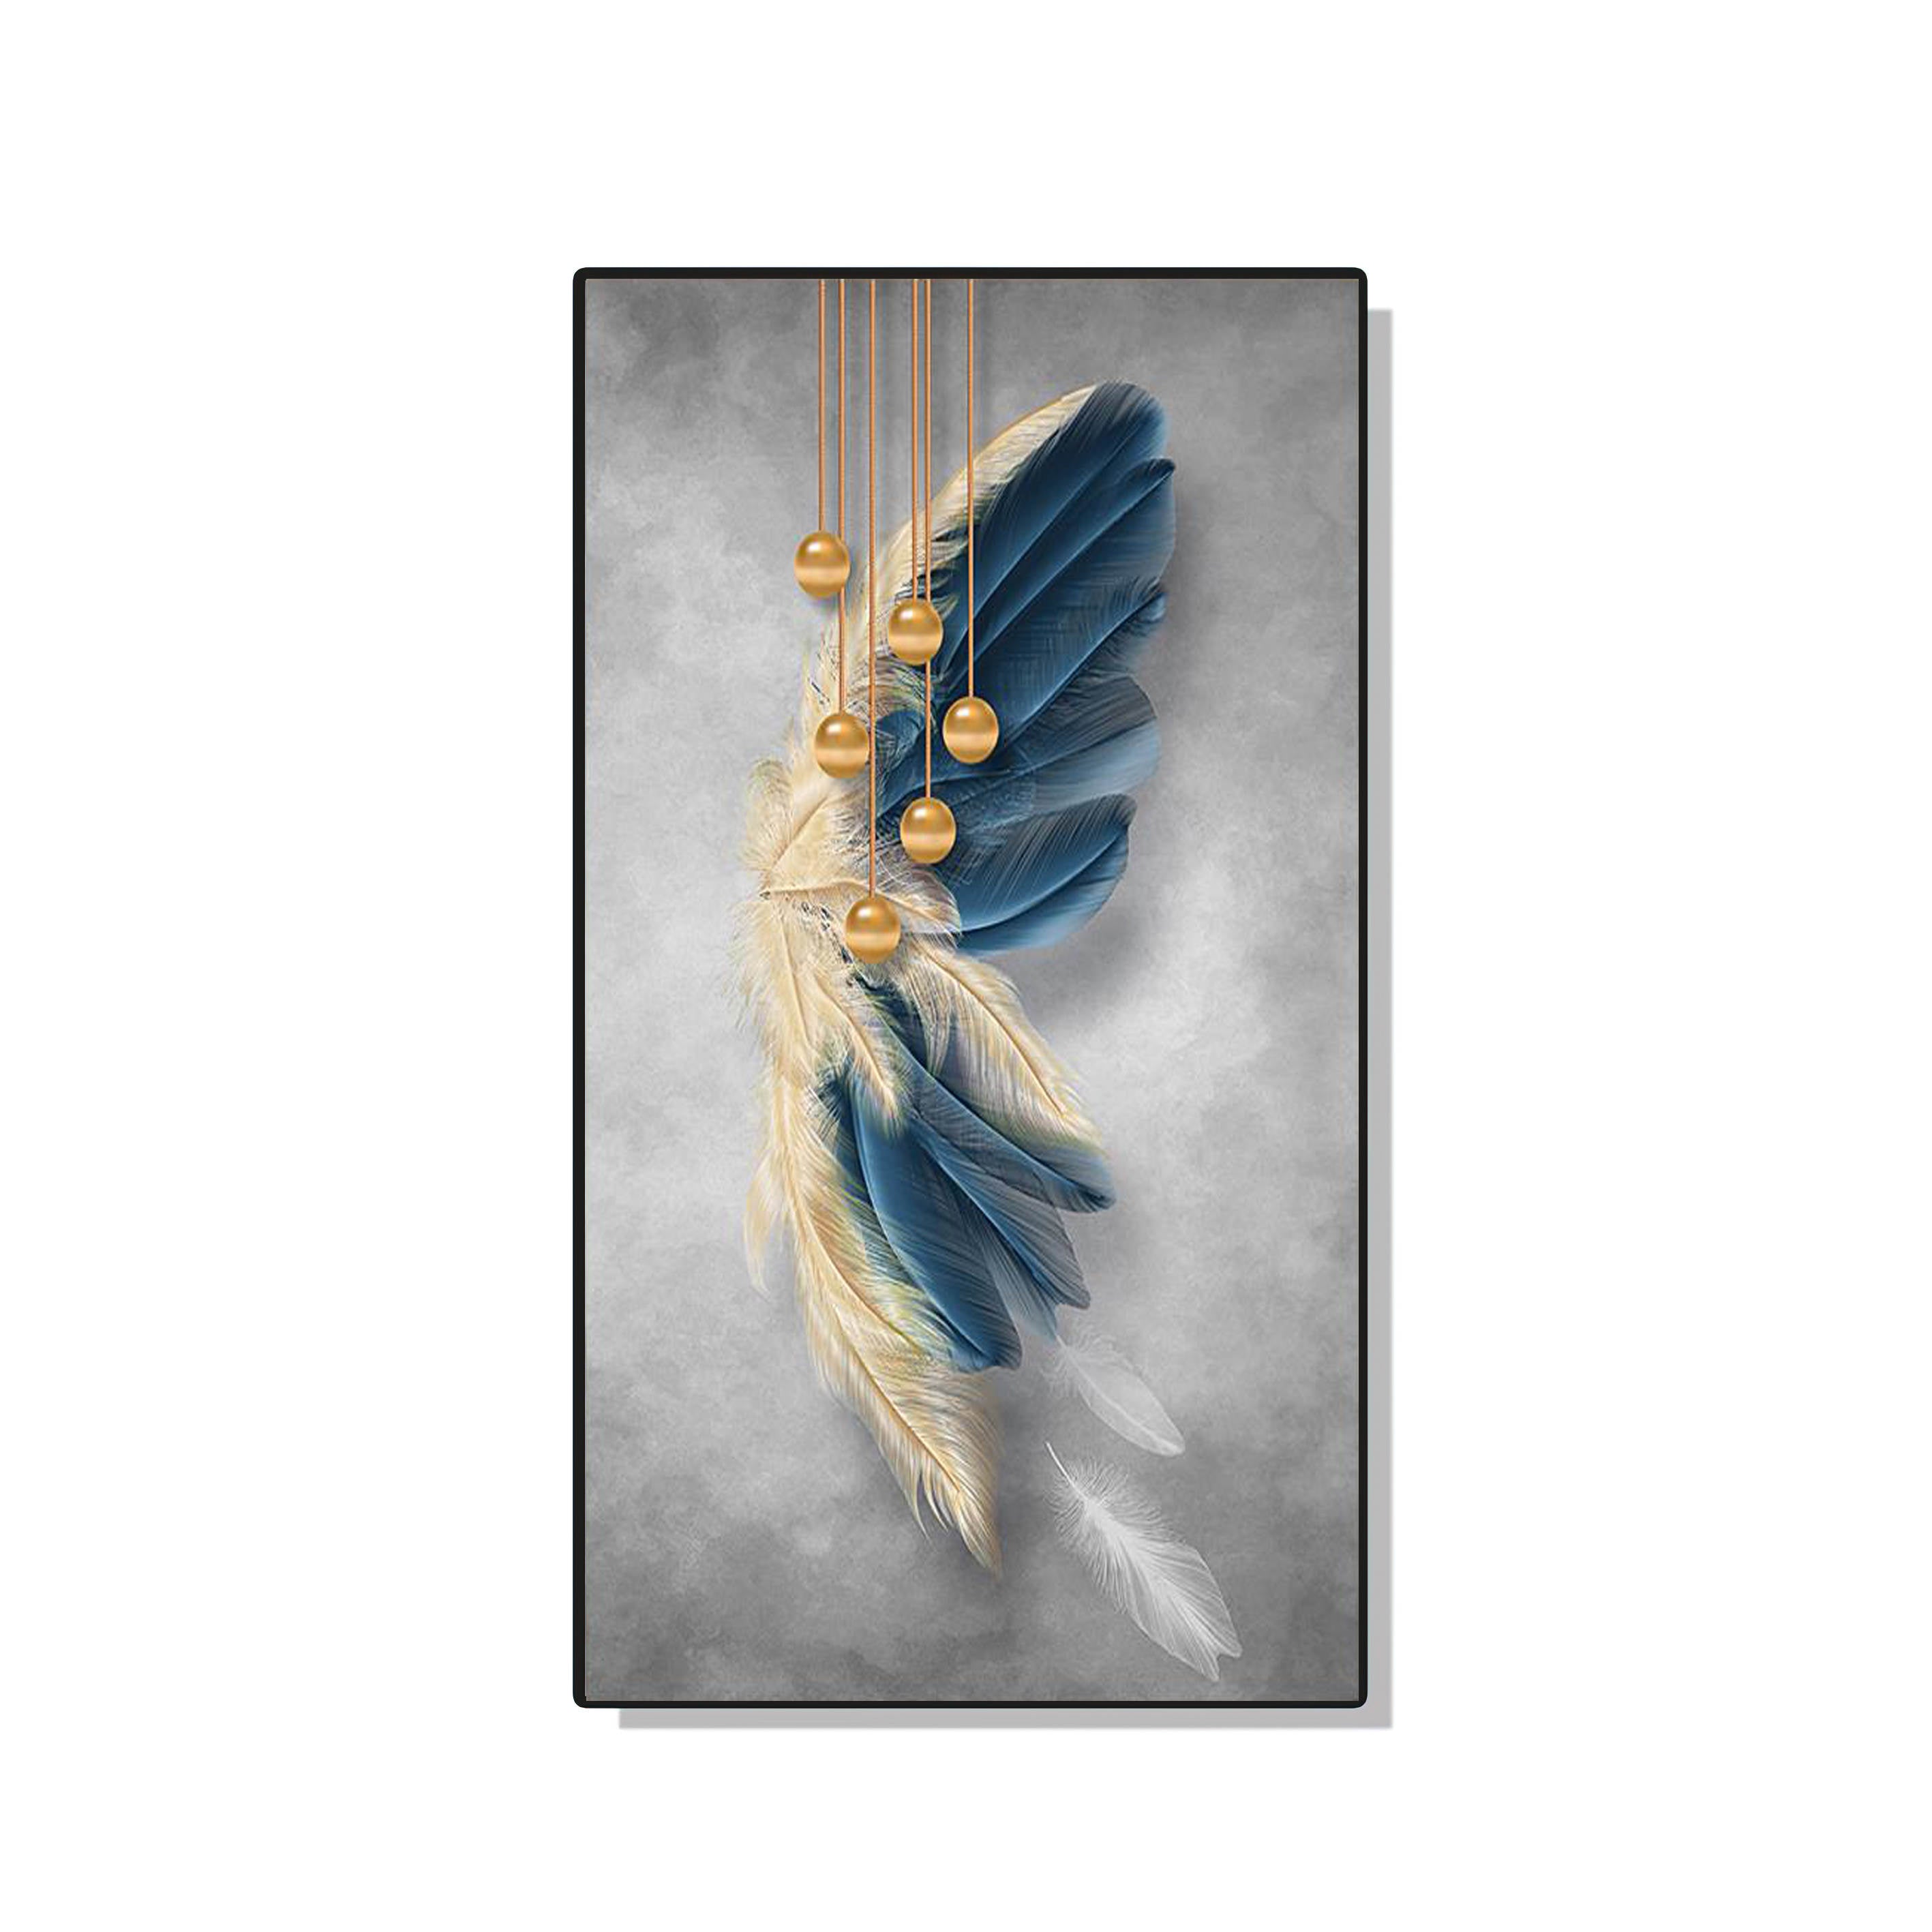 Large Feathers Abstract Wall Painting - Impressive 80x160 cm Art Home Decor crystal porcelain Framed Large wall wall art wall accents